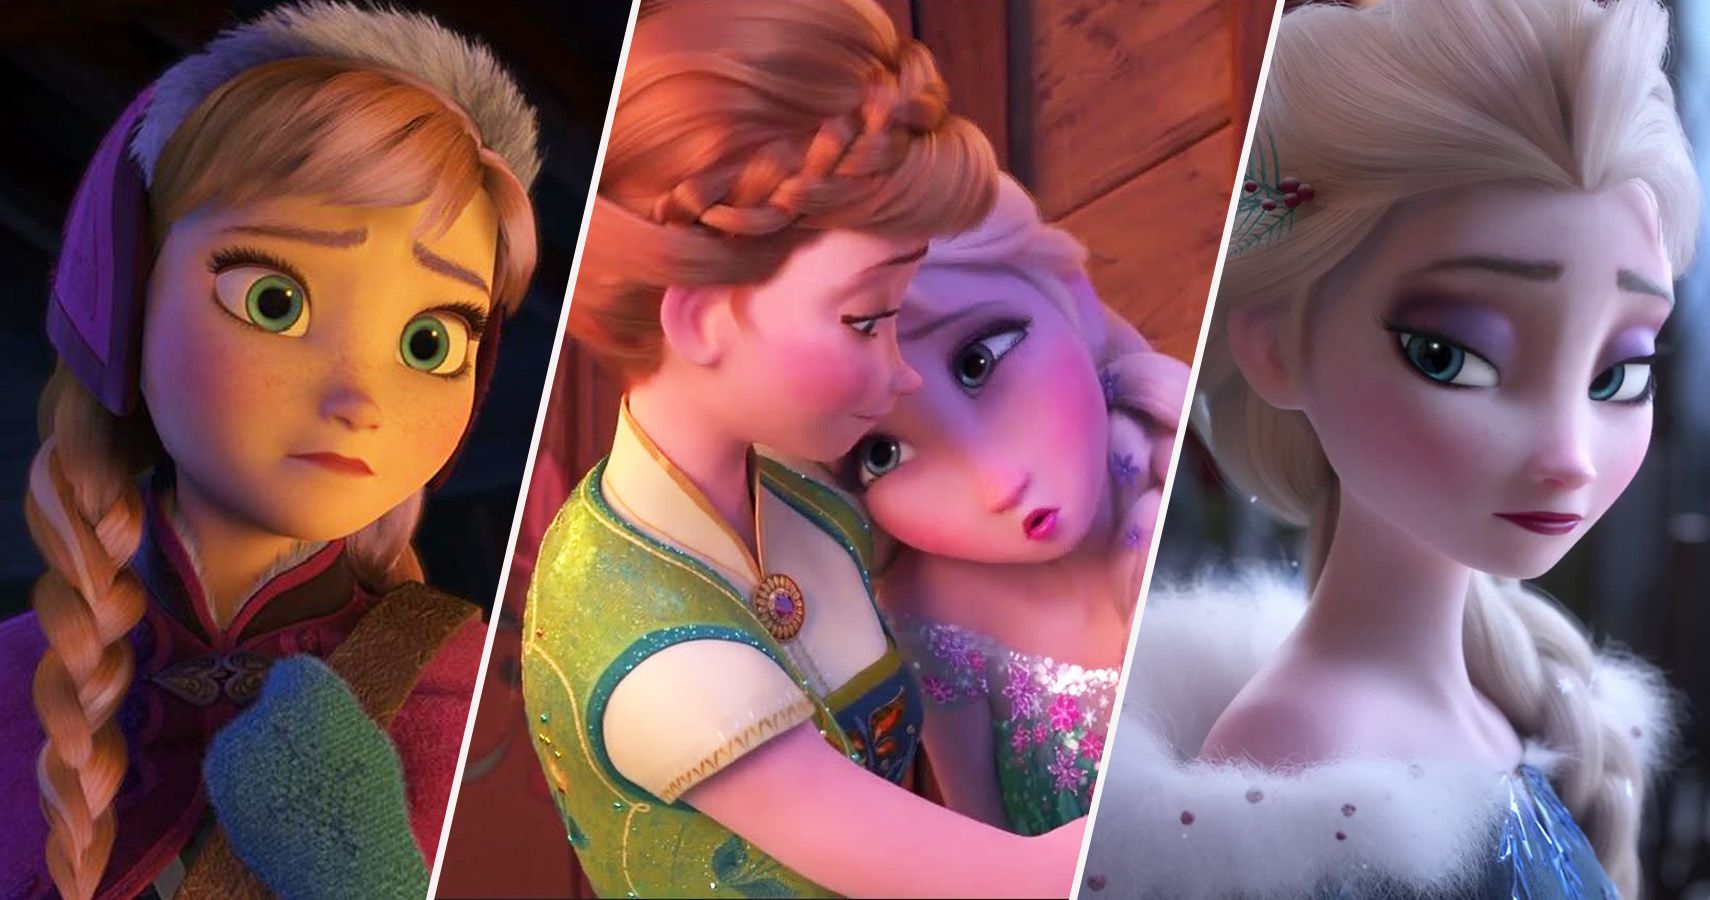 Tangled: The Series is the best show you're not watchingHelloGiggles